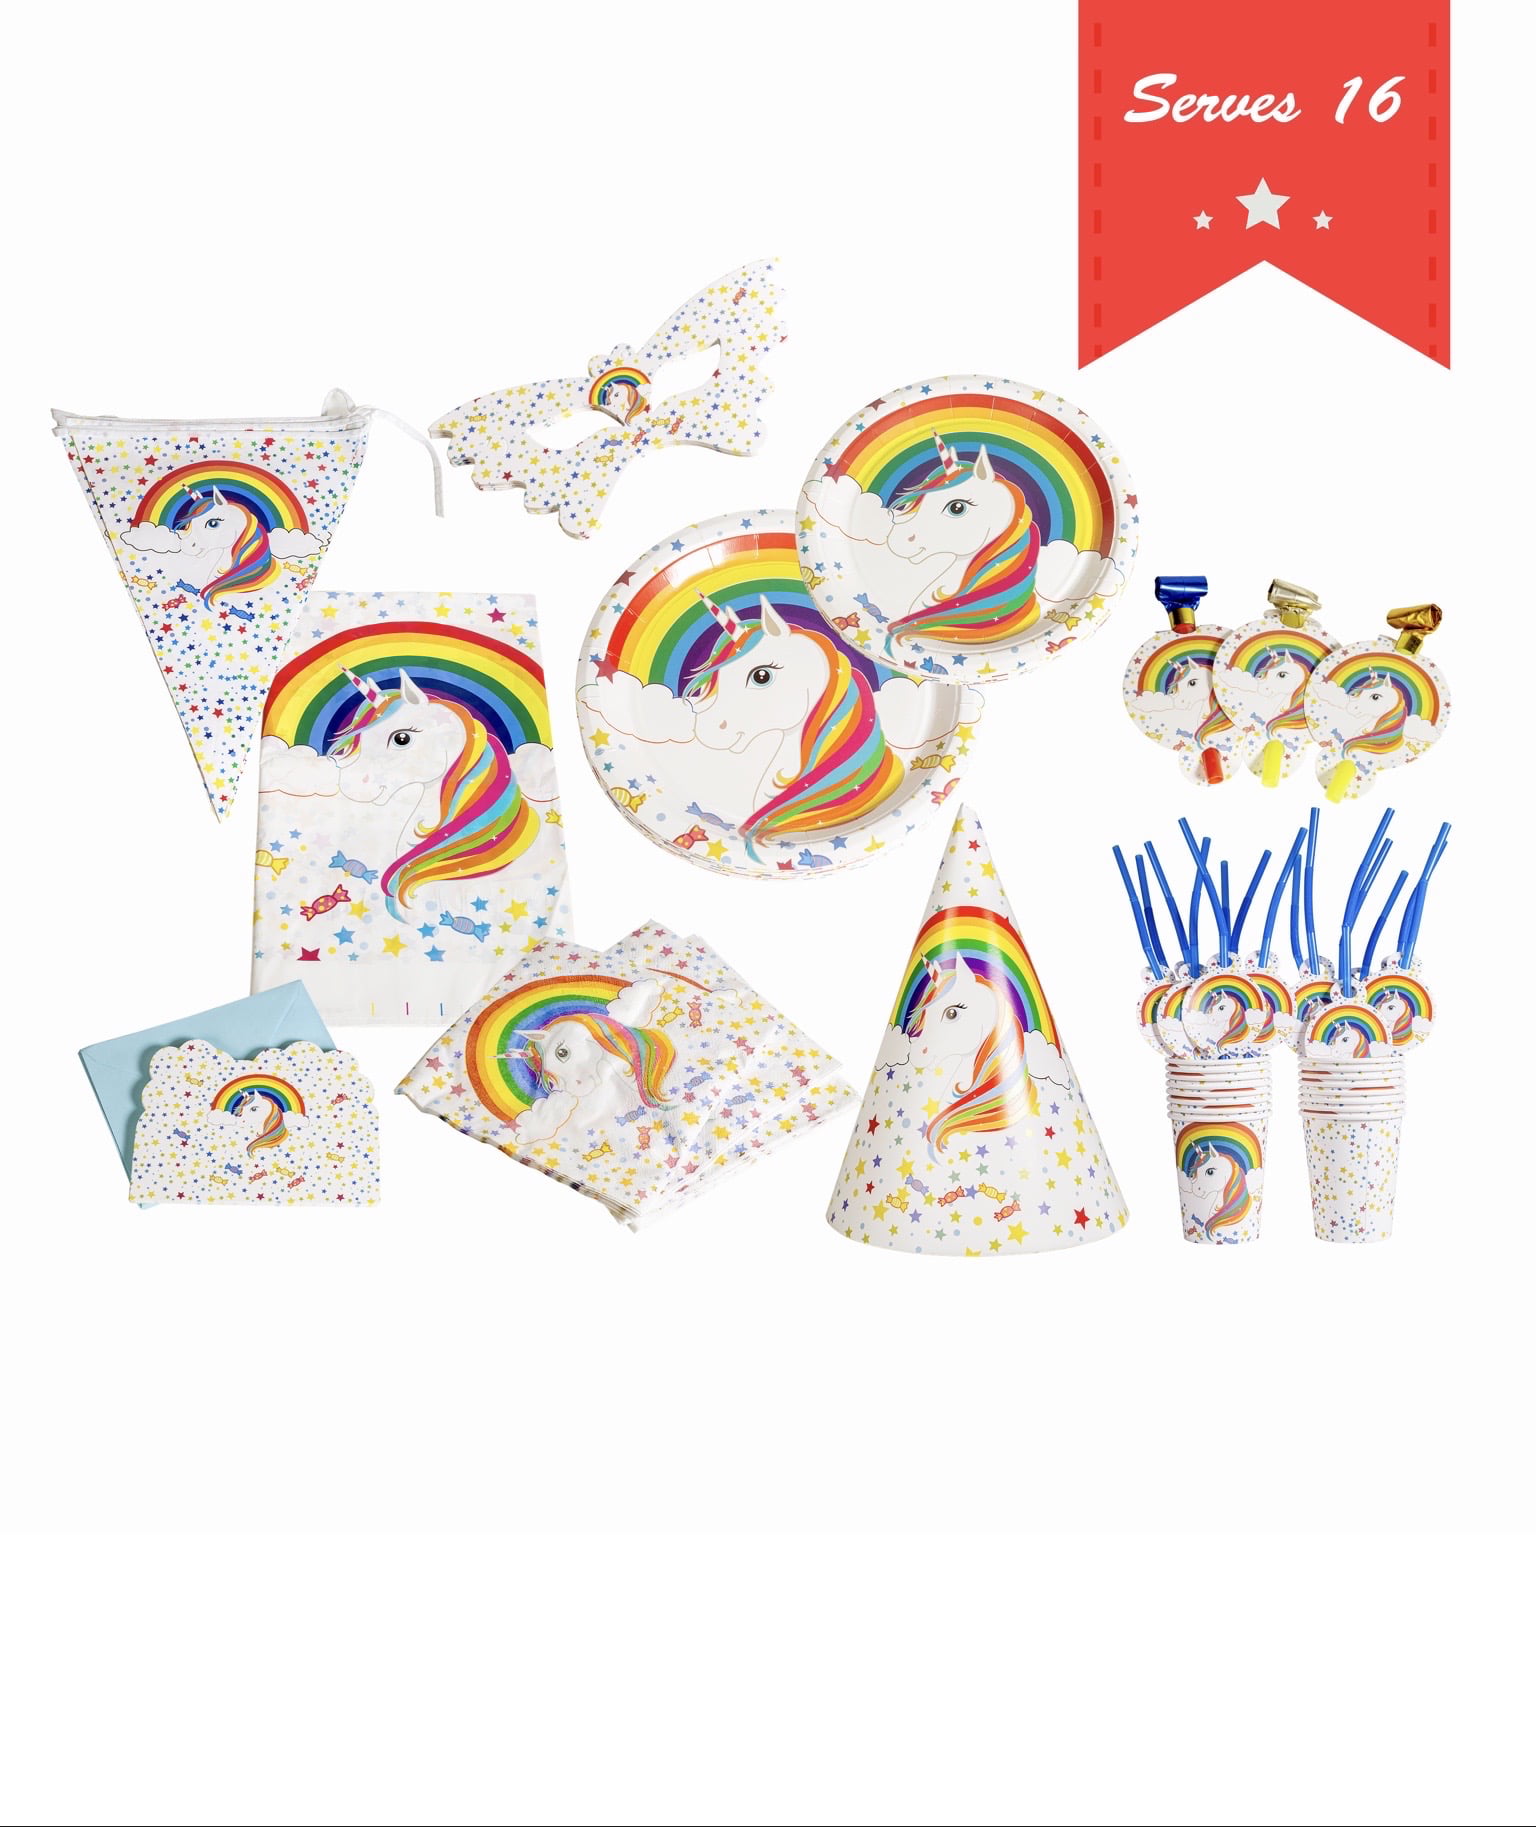 242 Piece Rainbow Unicorn Party Supplies with Tableware and Decorations for Birthdays| Serves 16